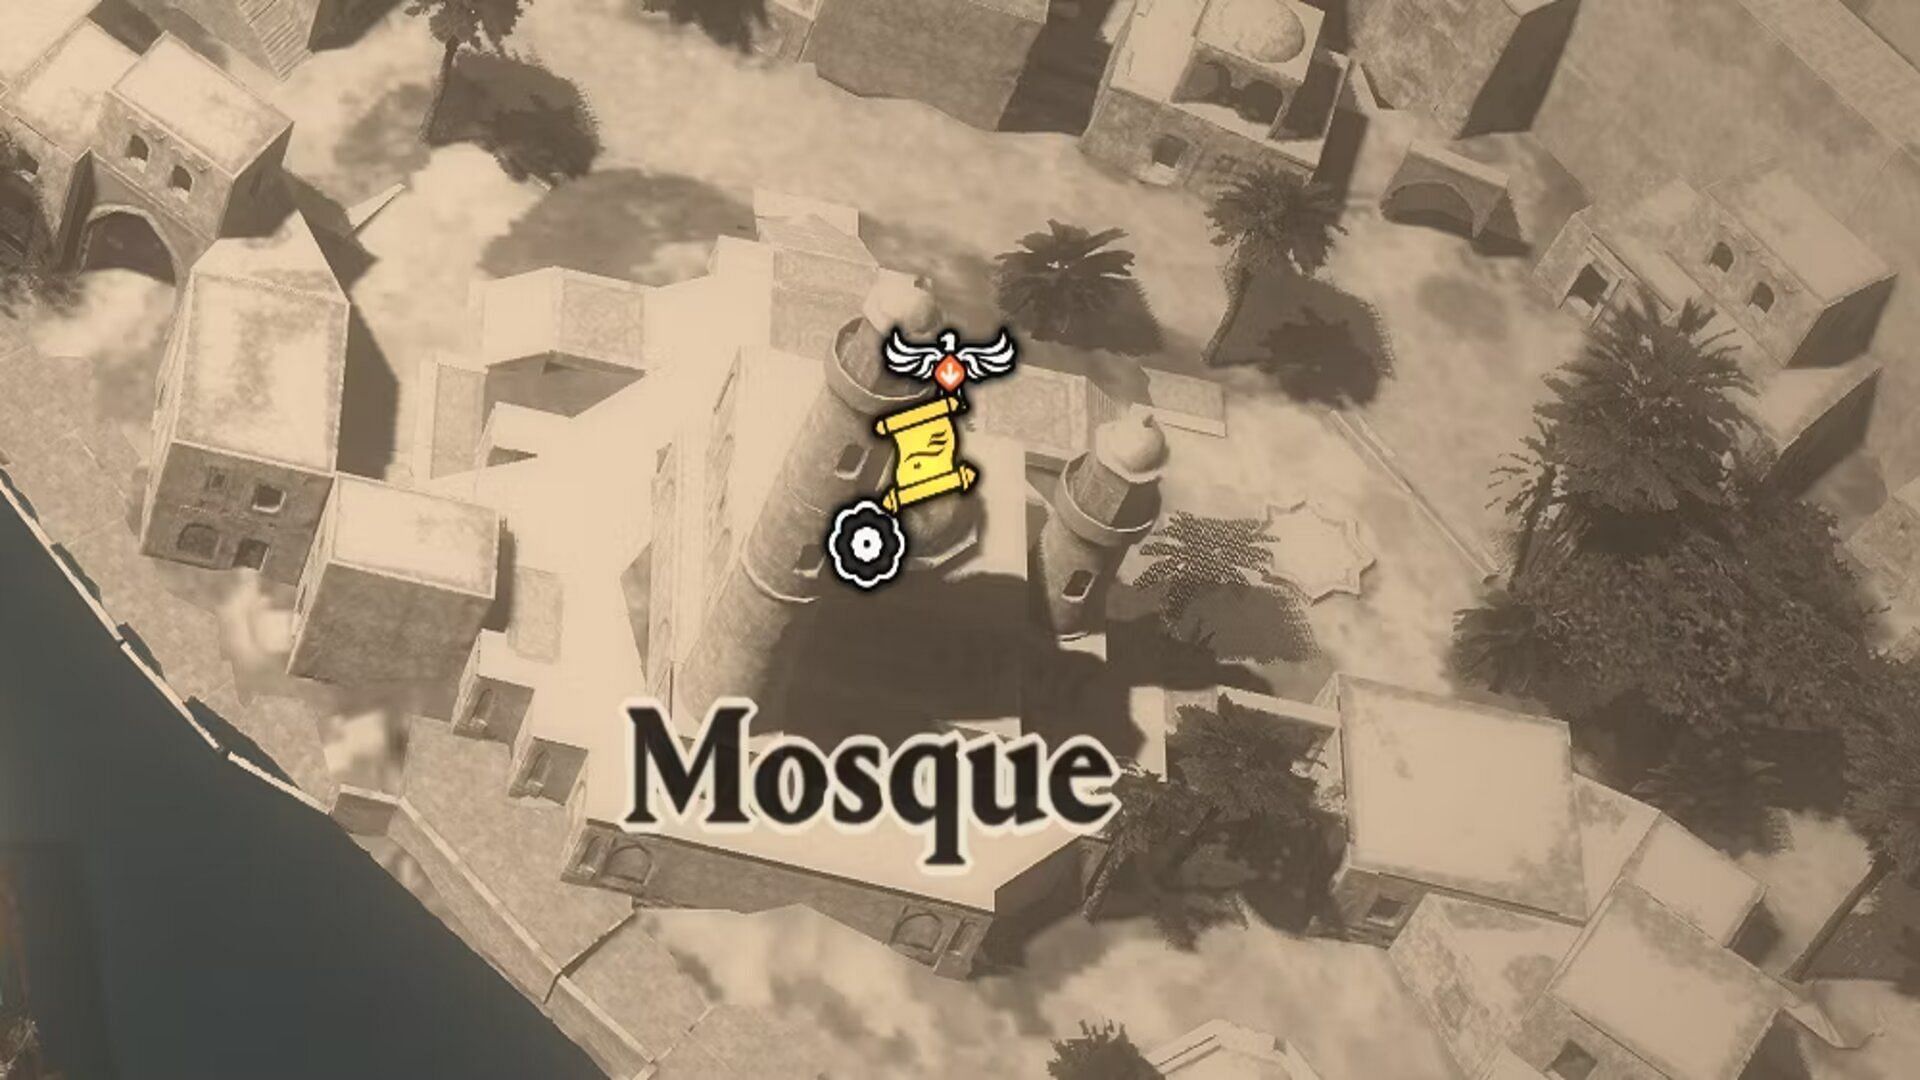 The mosque in Abbasiyah district (Image via Ubisoft)